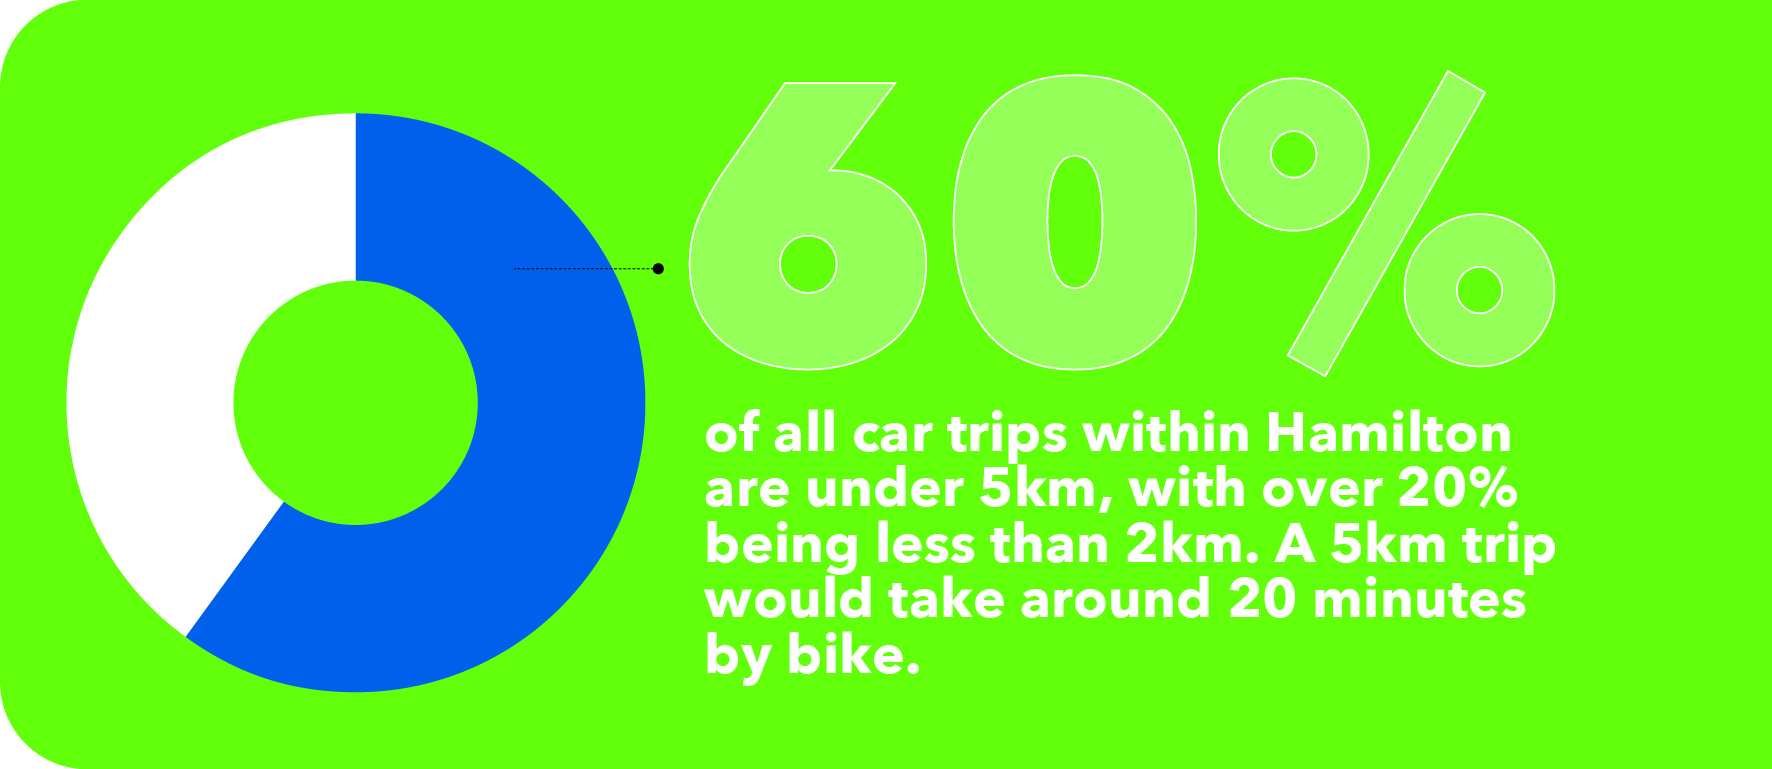 60 percent of all car trips within Hamilton are under 5km.....